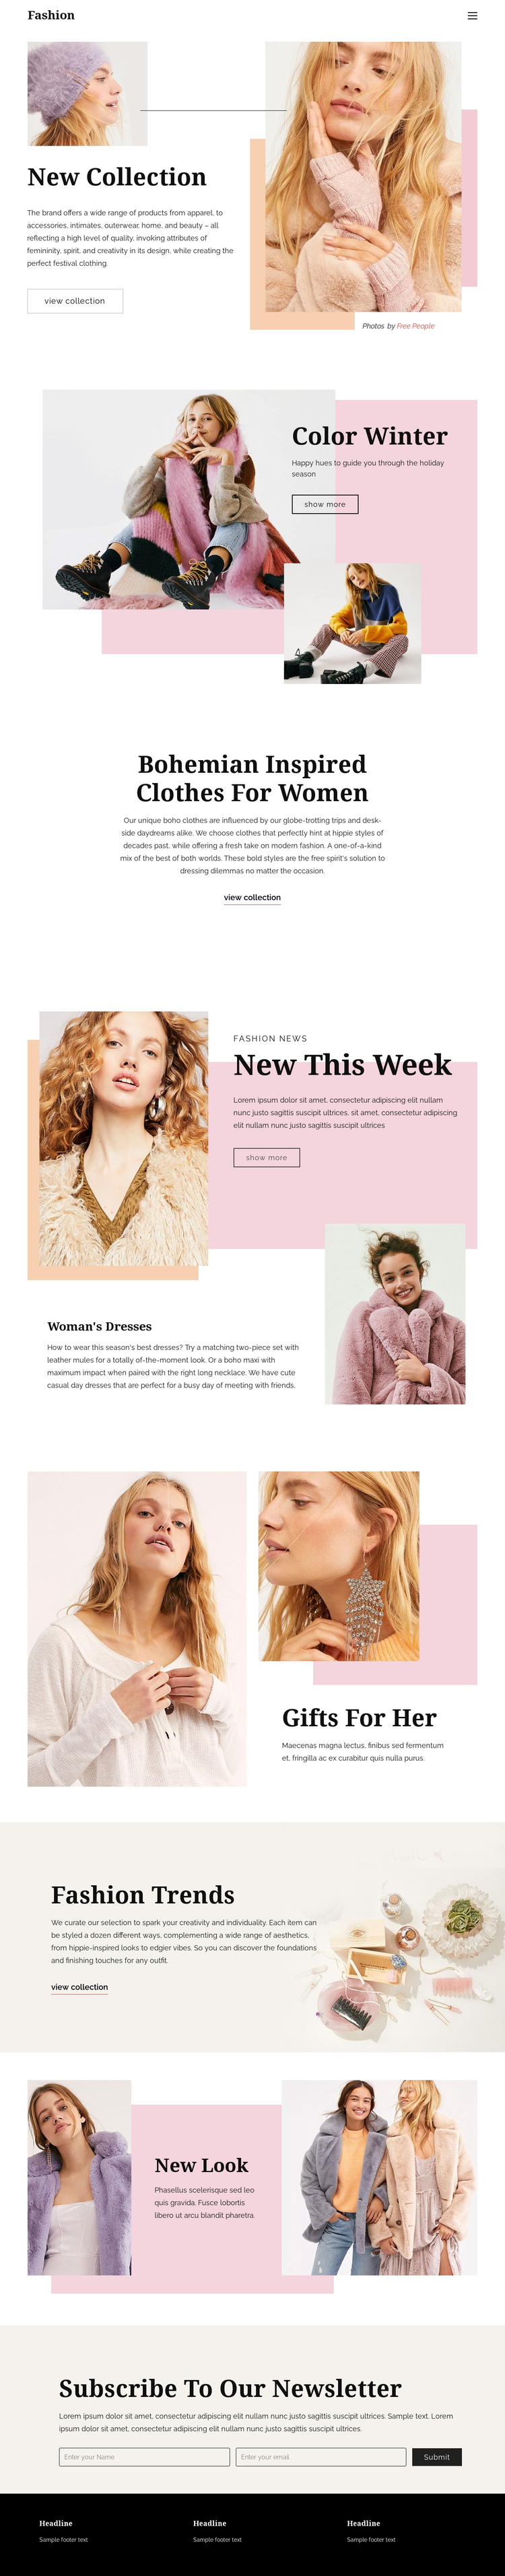 Fashion Page Design One Page Template